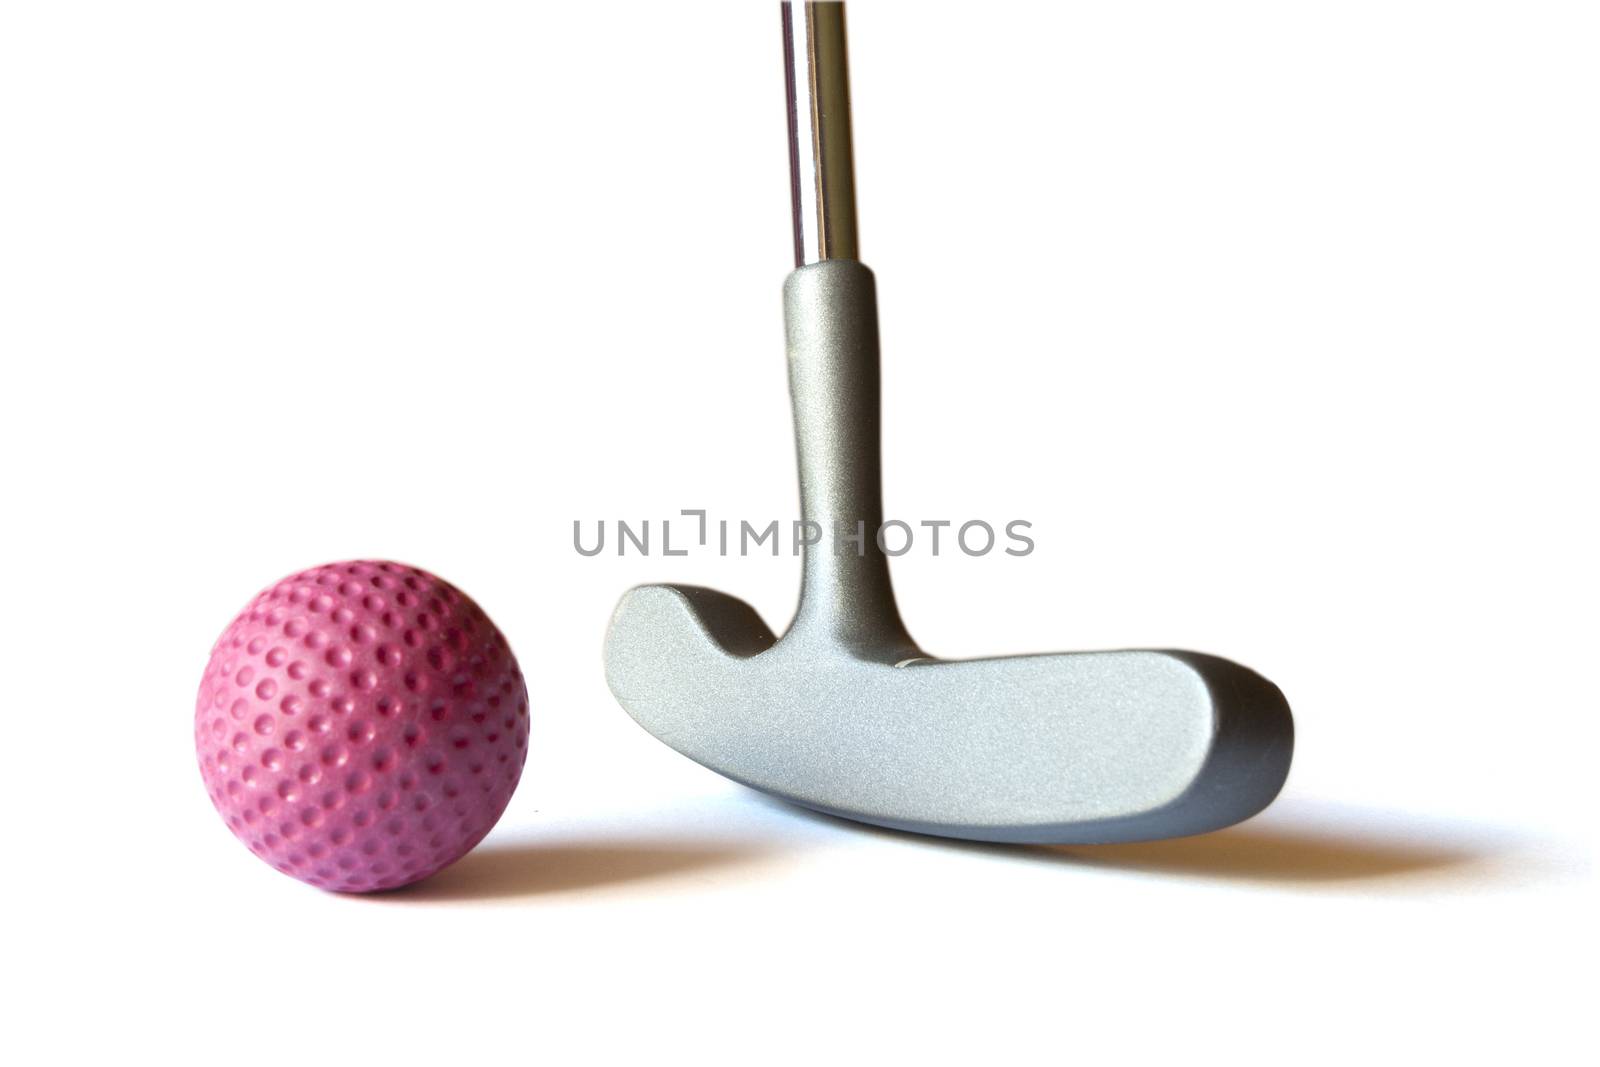 Mini Golf Stick with red colored ball on an isolated background